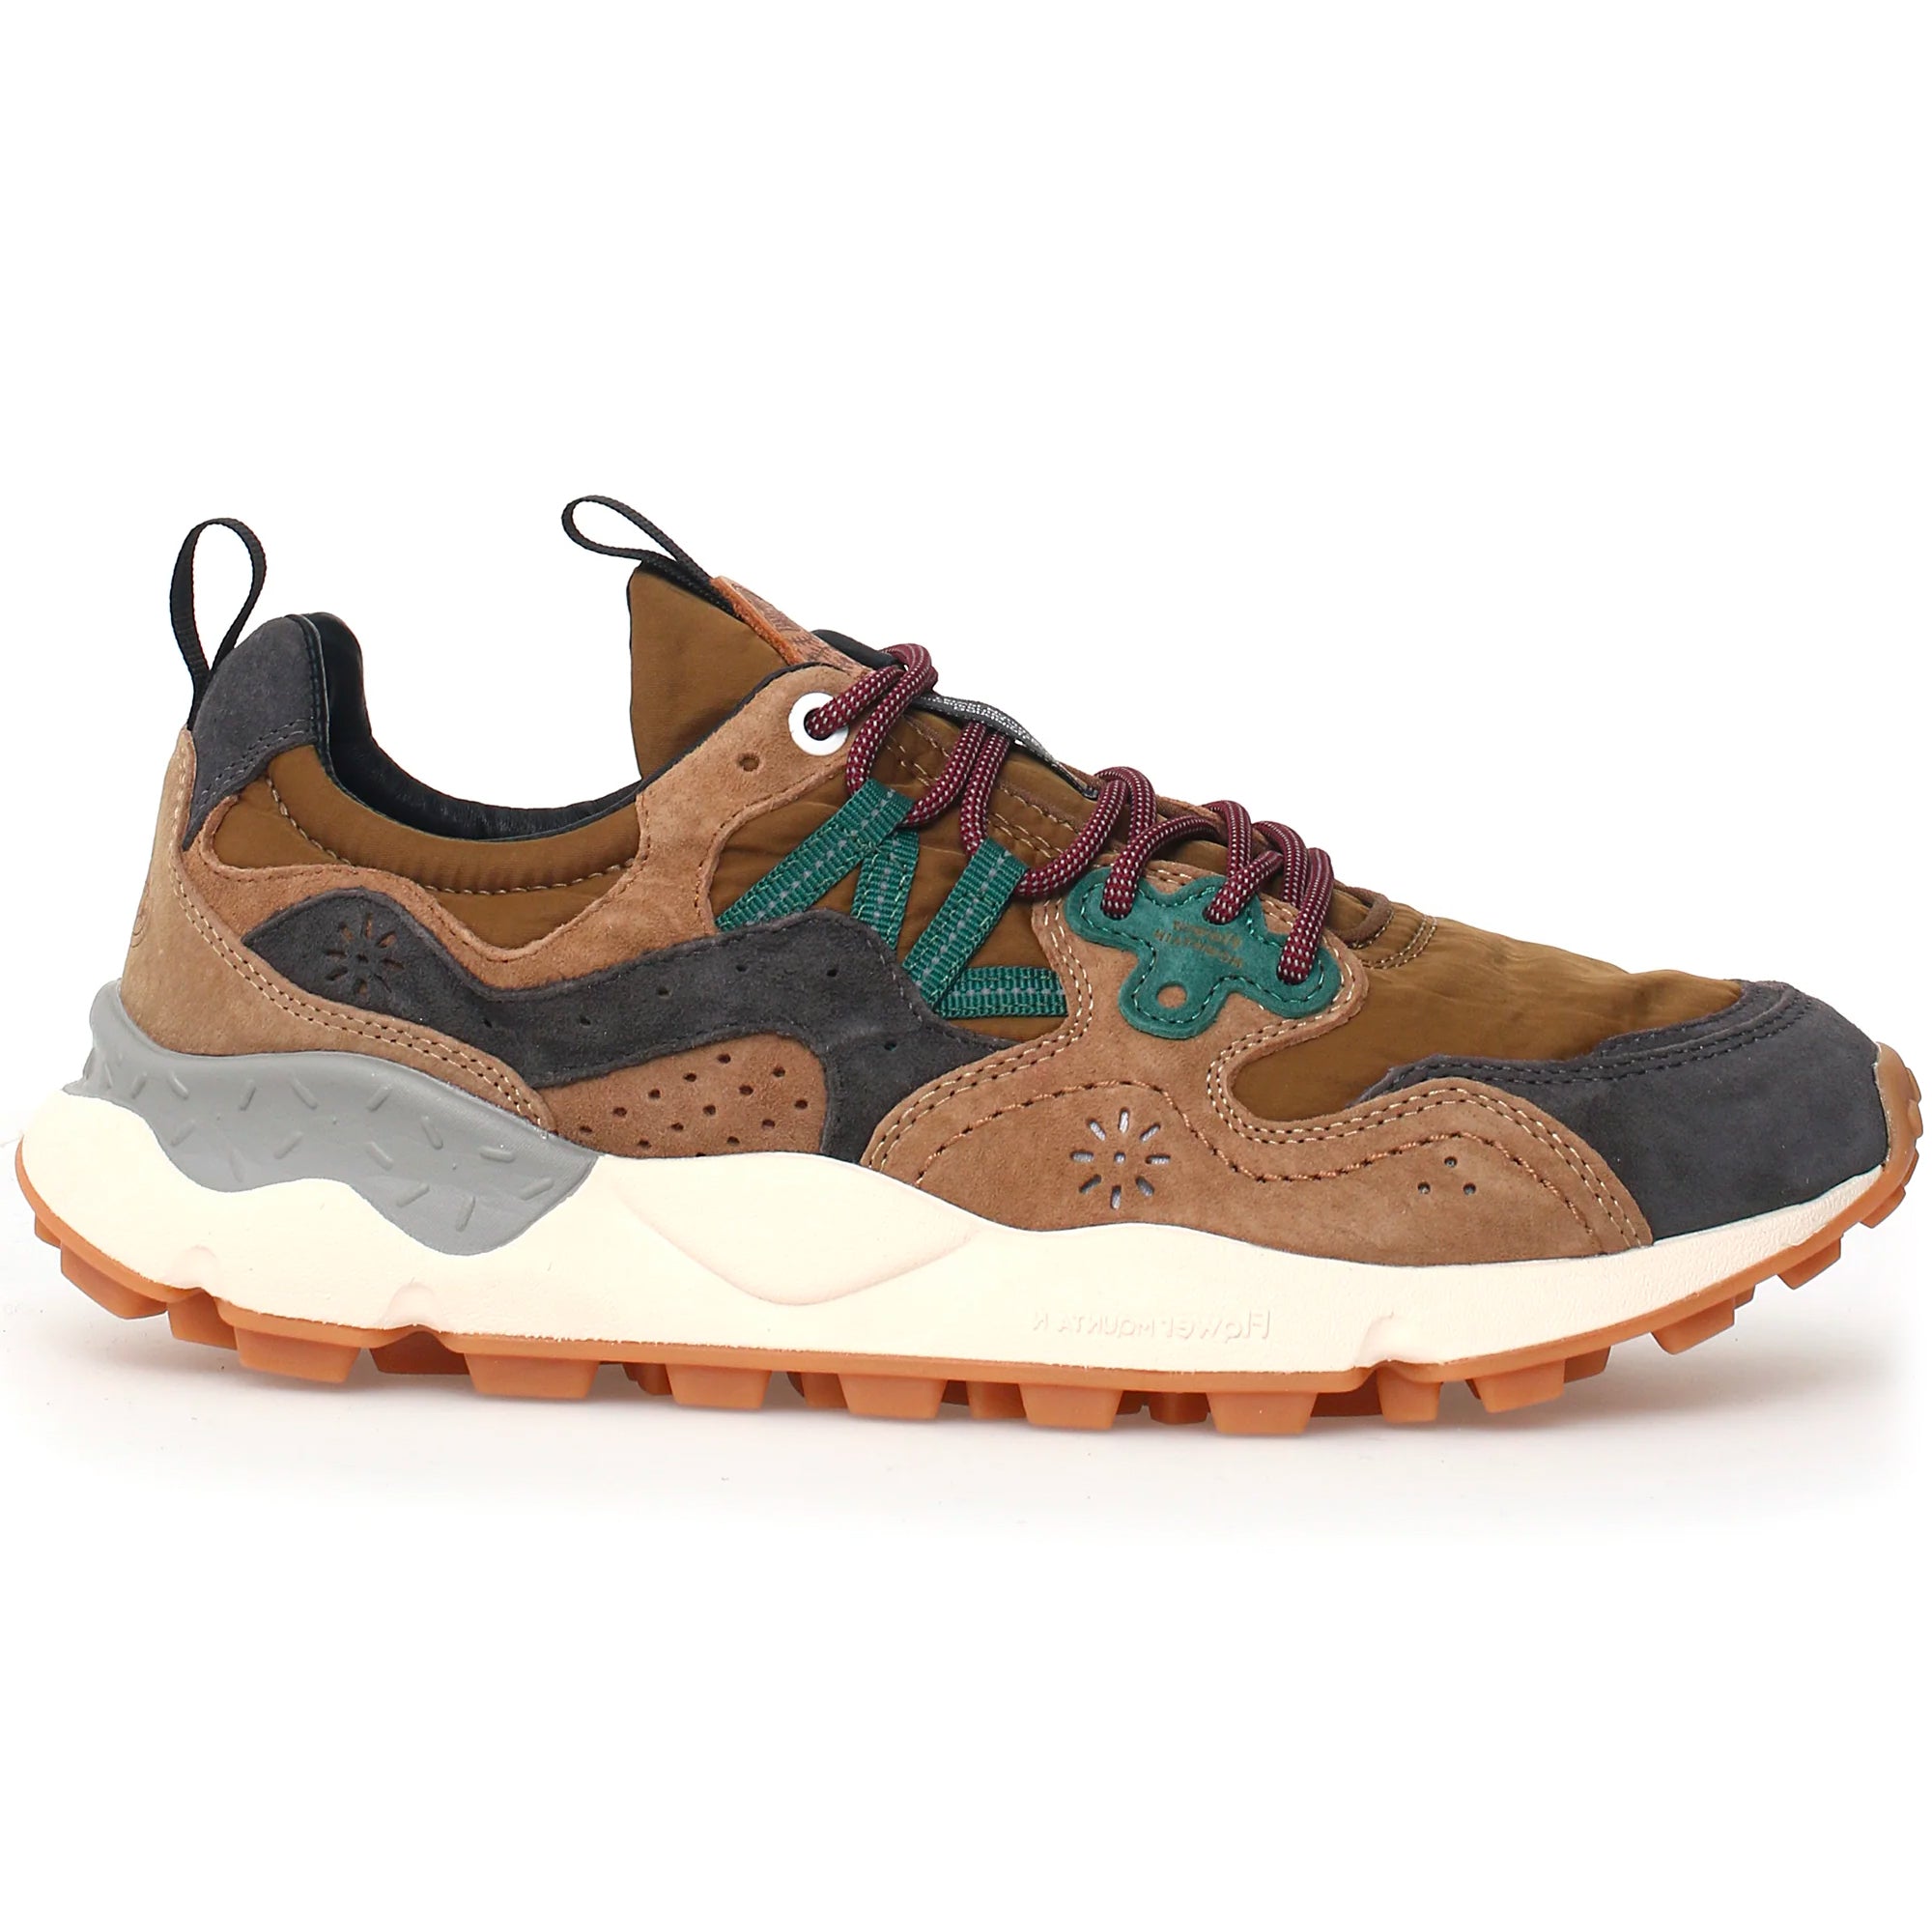 Flower Mountain Yamano 3 Trainers - Grey/Olive